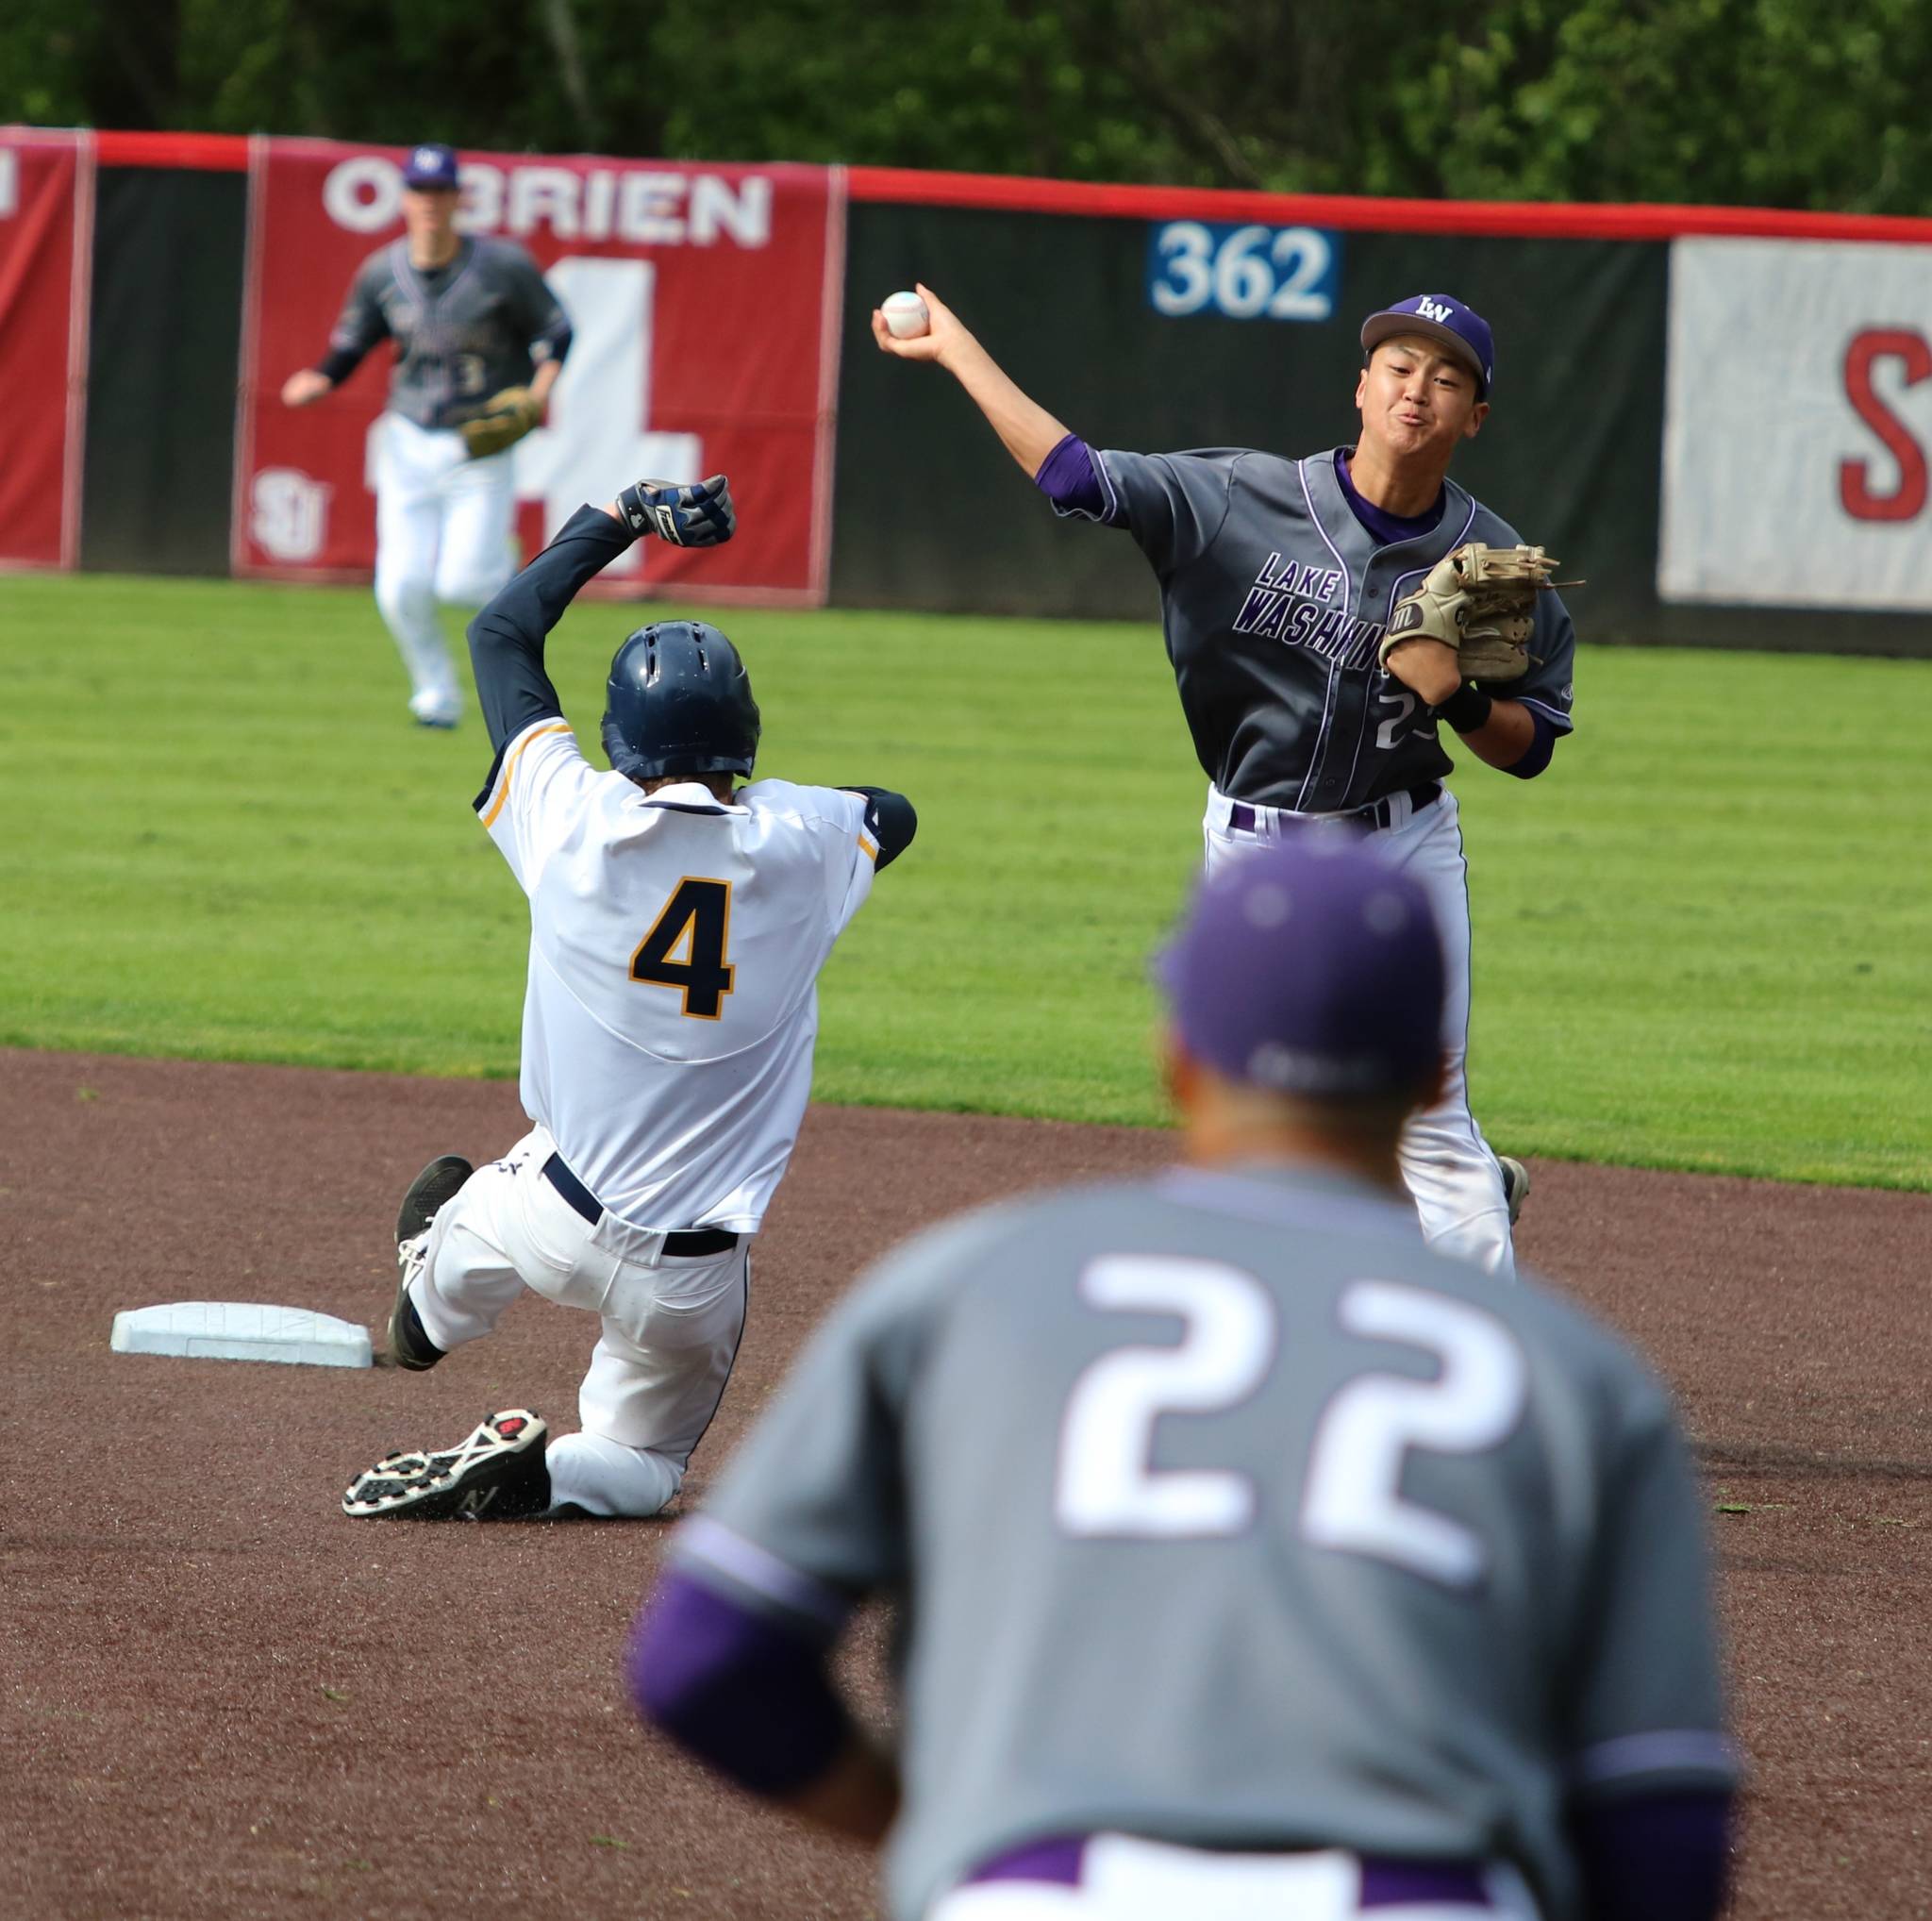 Lake Washington shortstop Travis Lee completes a double play on Friday. Andy Nystrom, Kirkland Reporter